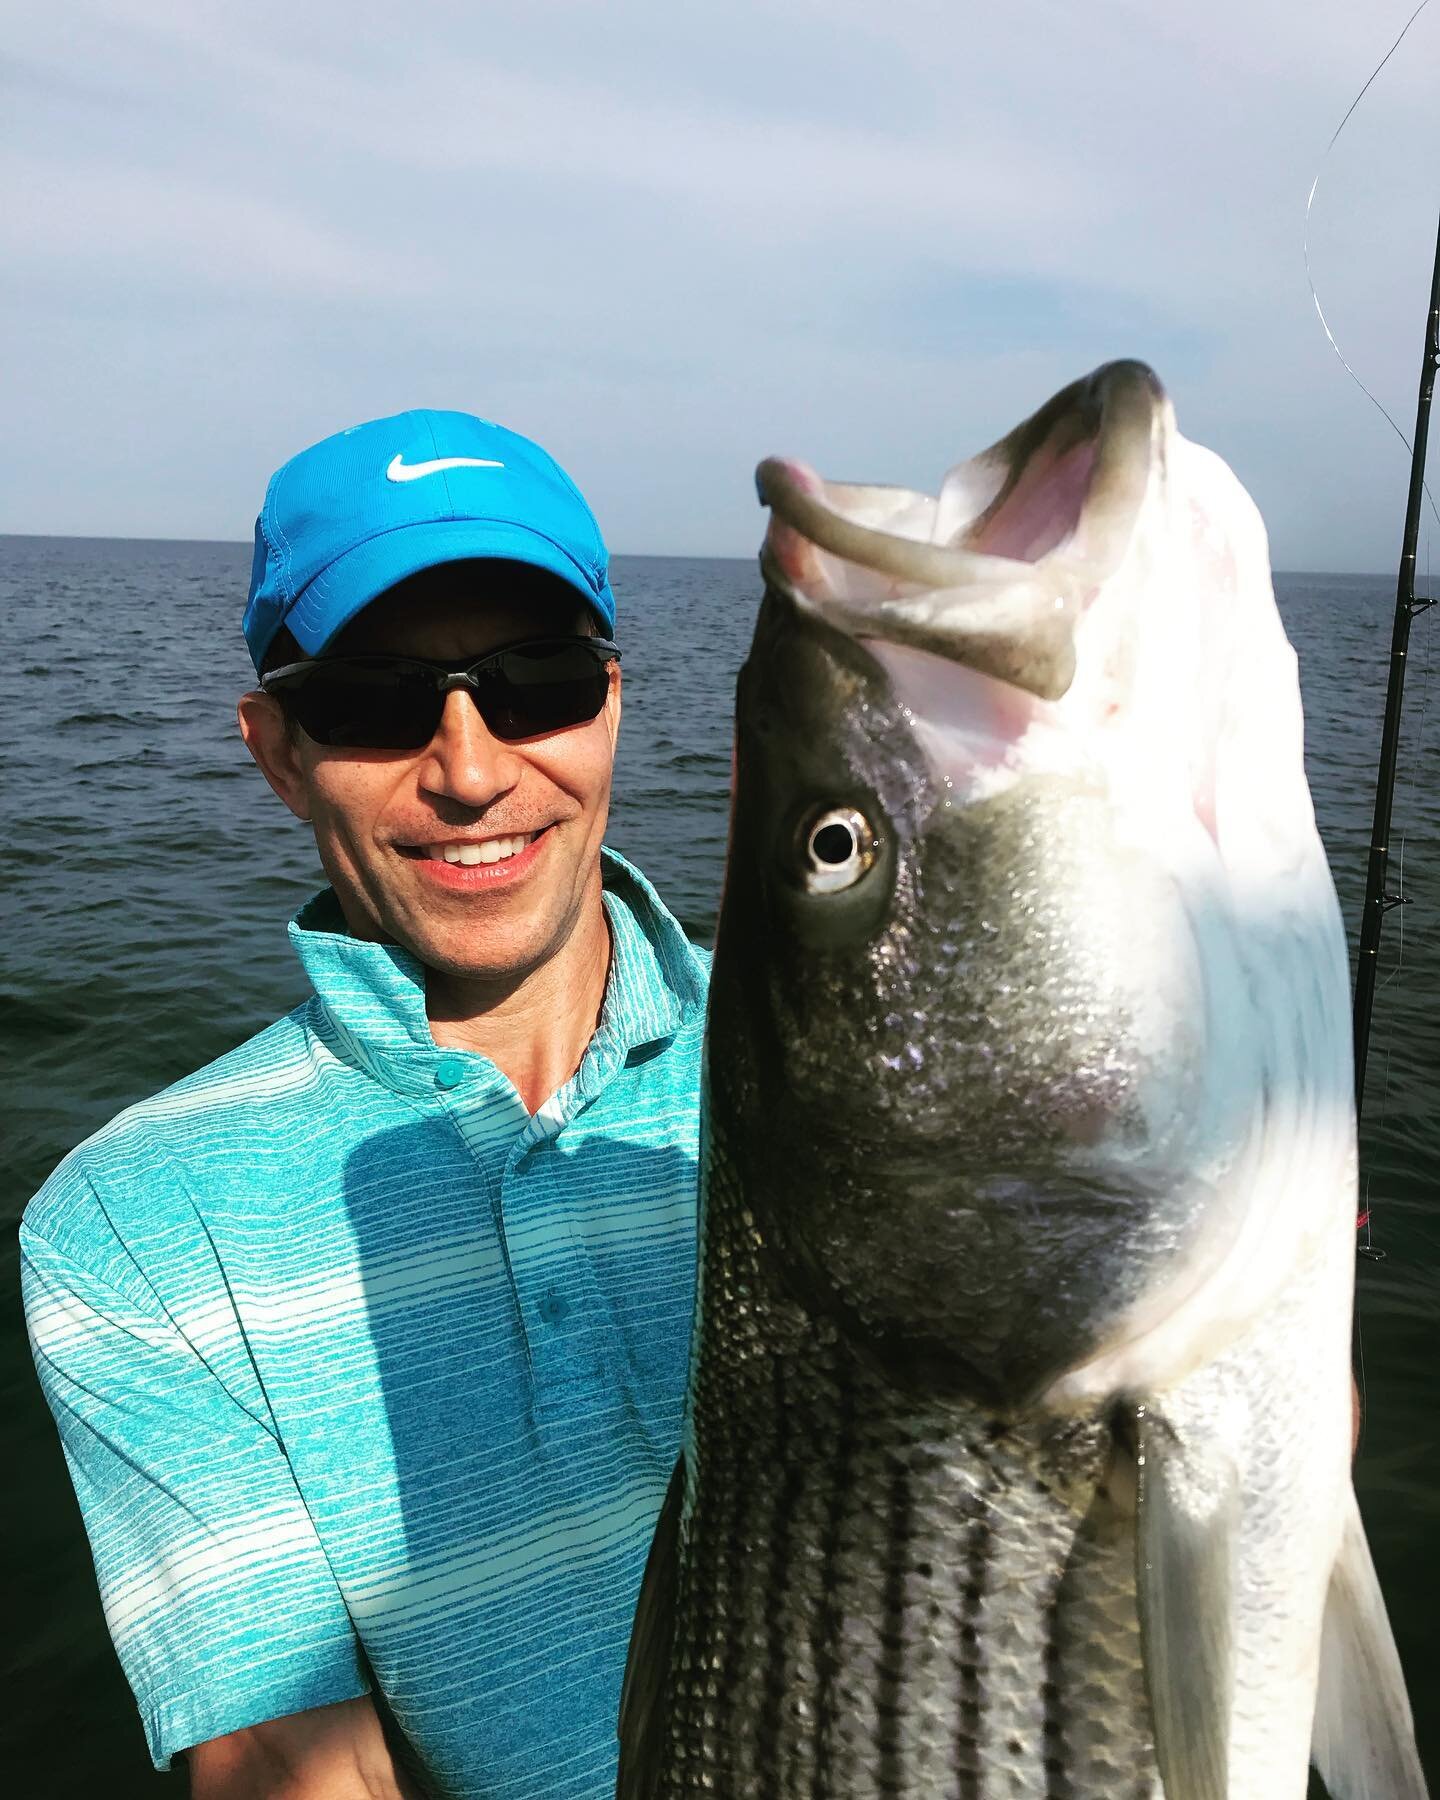 This nice 34&rdquo; striper caught on our morning trip